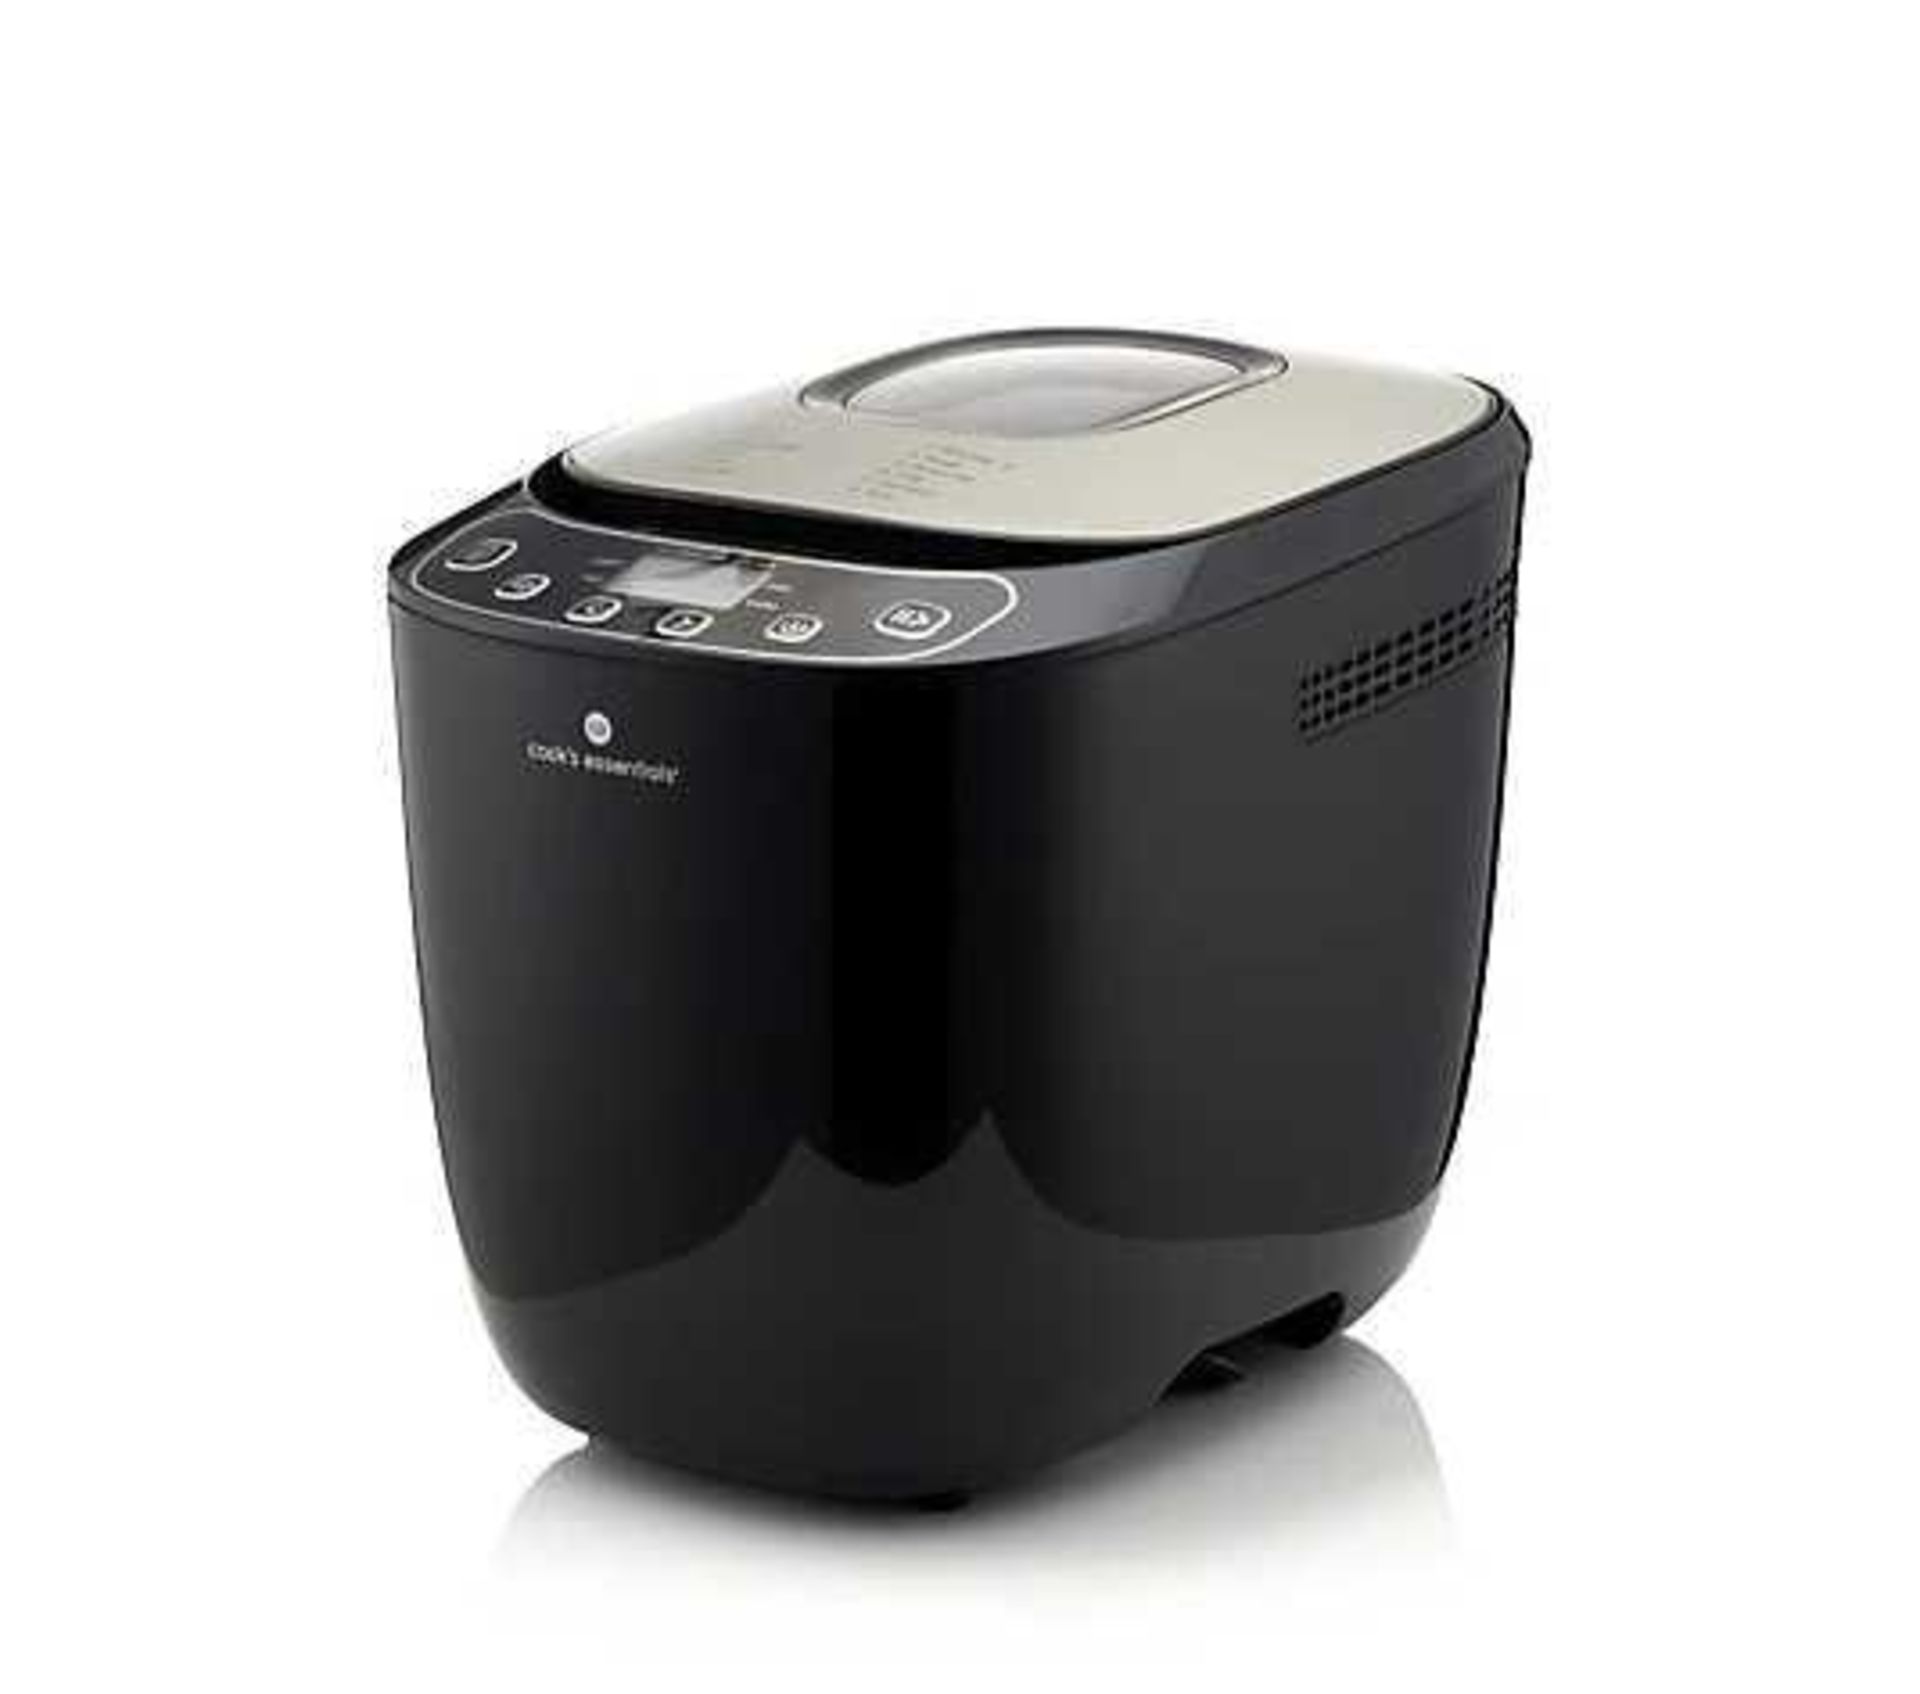 Combined RRP £120 Lot To Contain 2 Cook Essentials Black Bread Makers